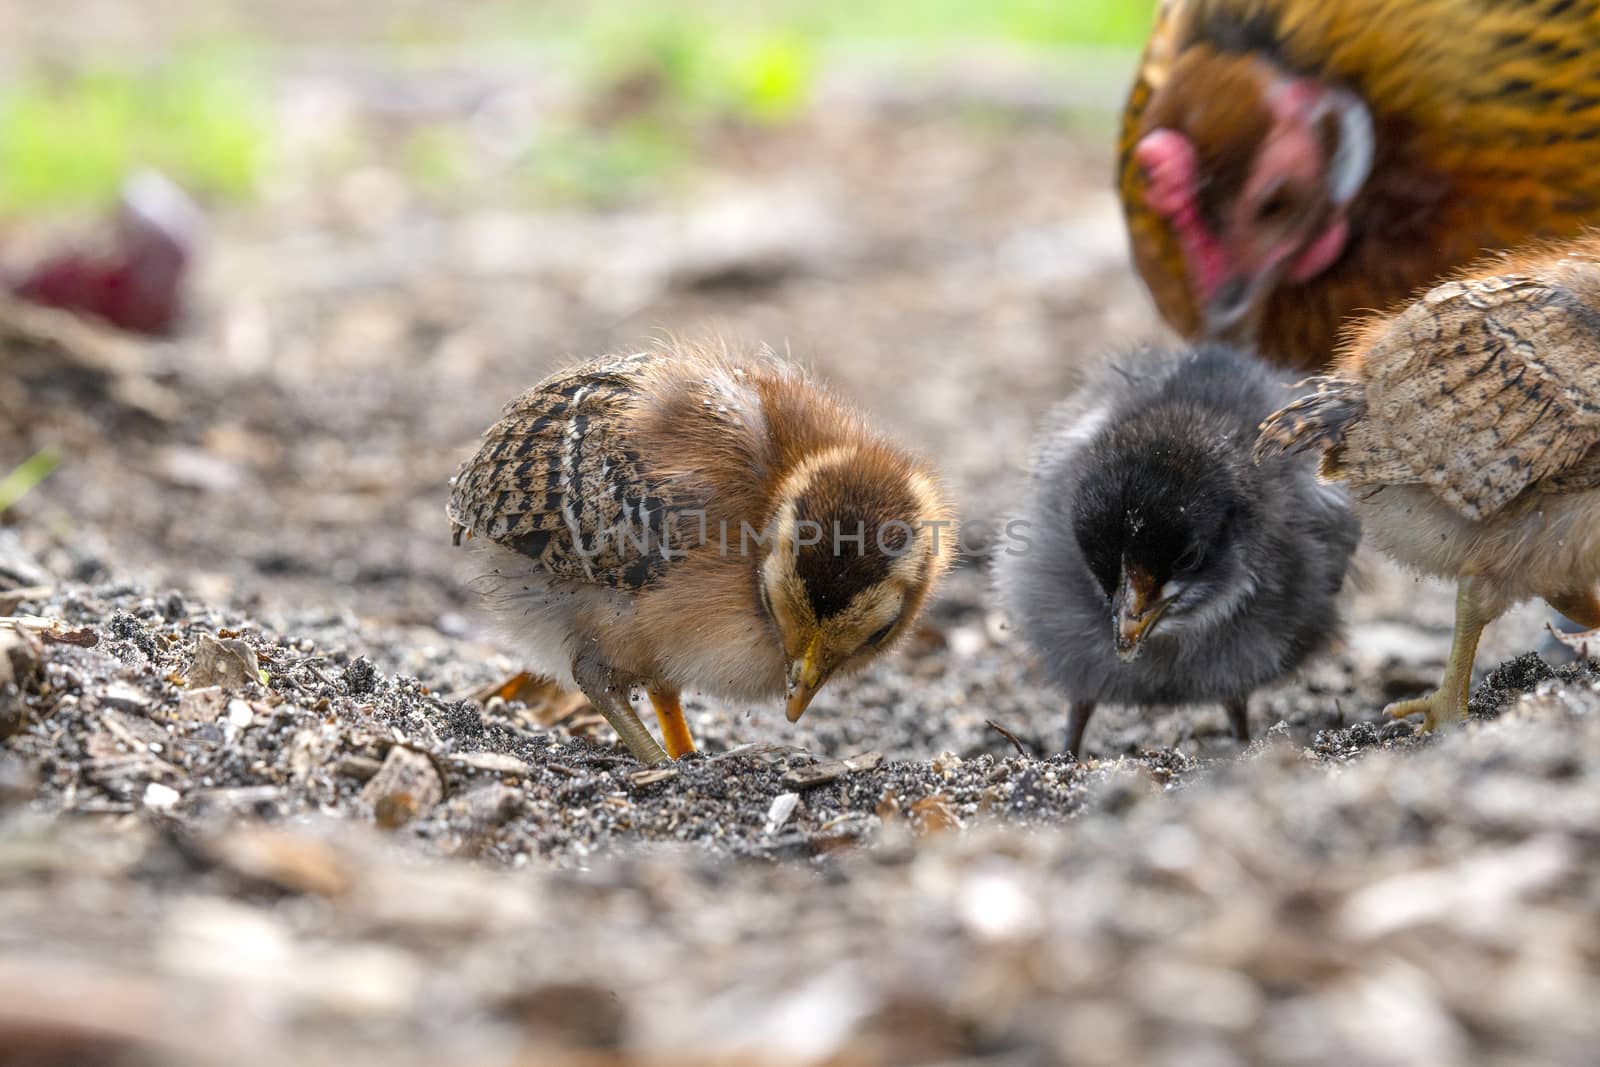 Chickens looking for food in a farm yard by Sportactive